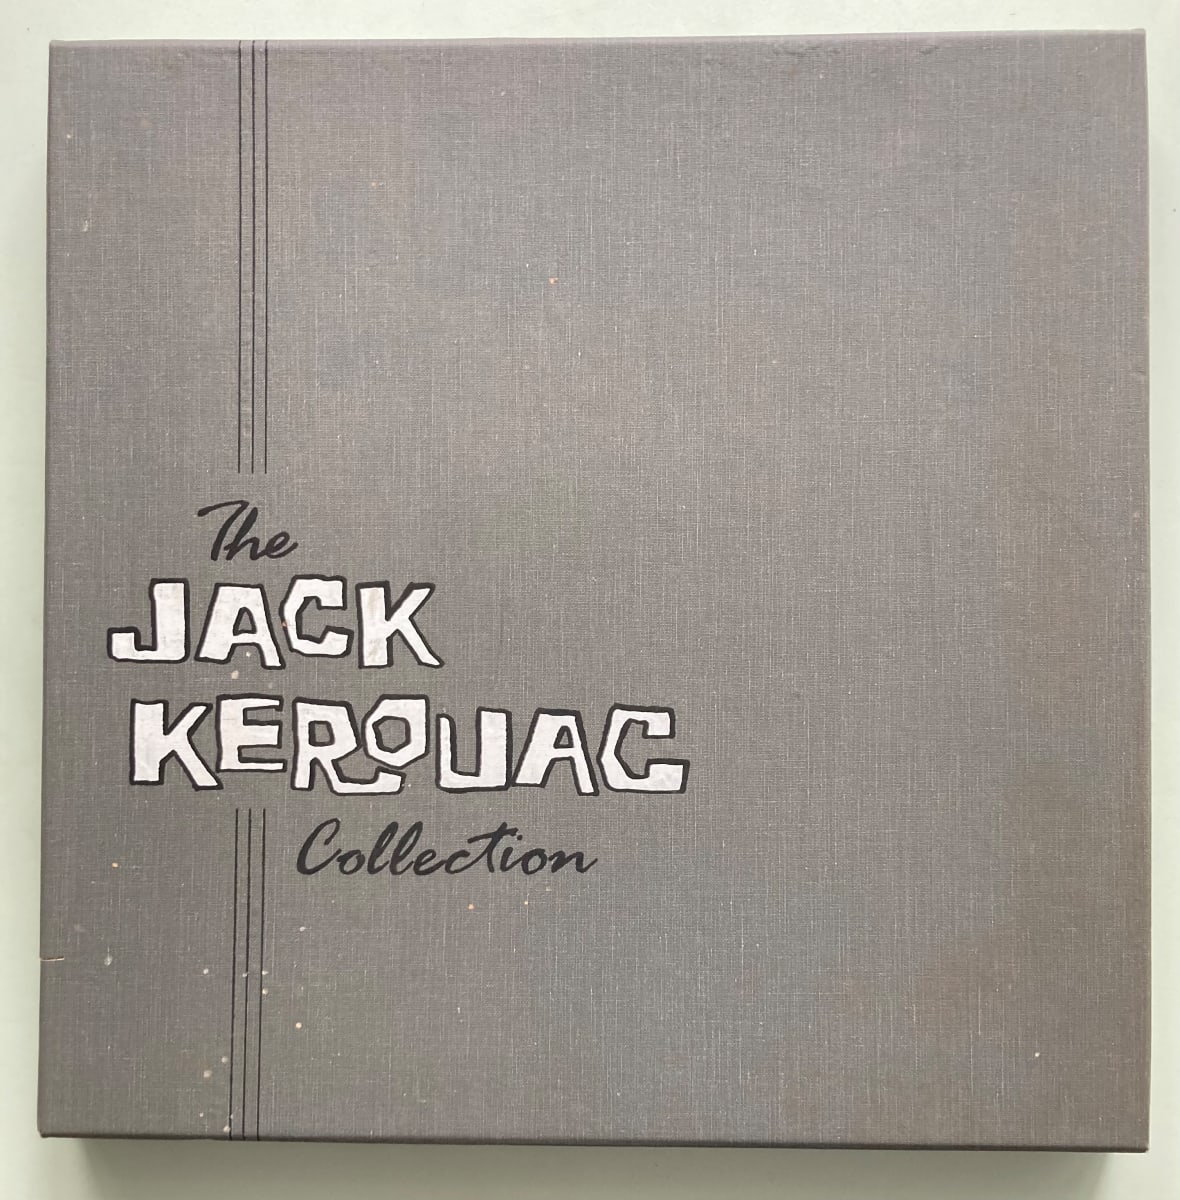 The Jack Kerouac Collection by Jack Kerouac 